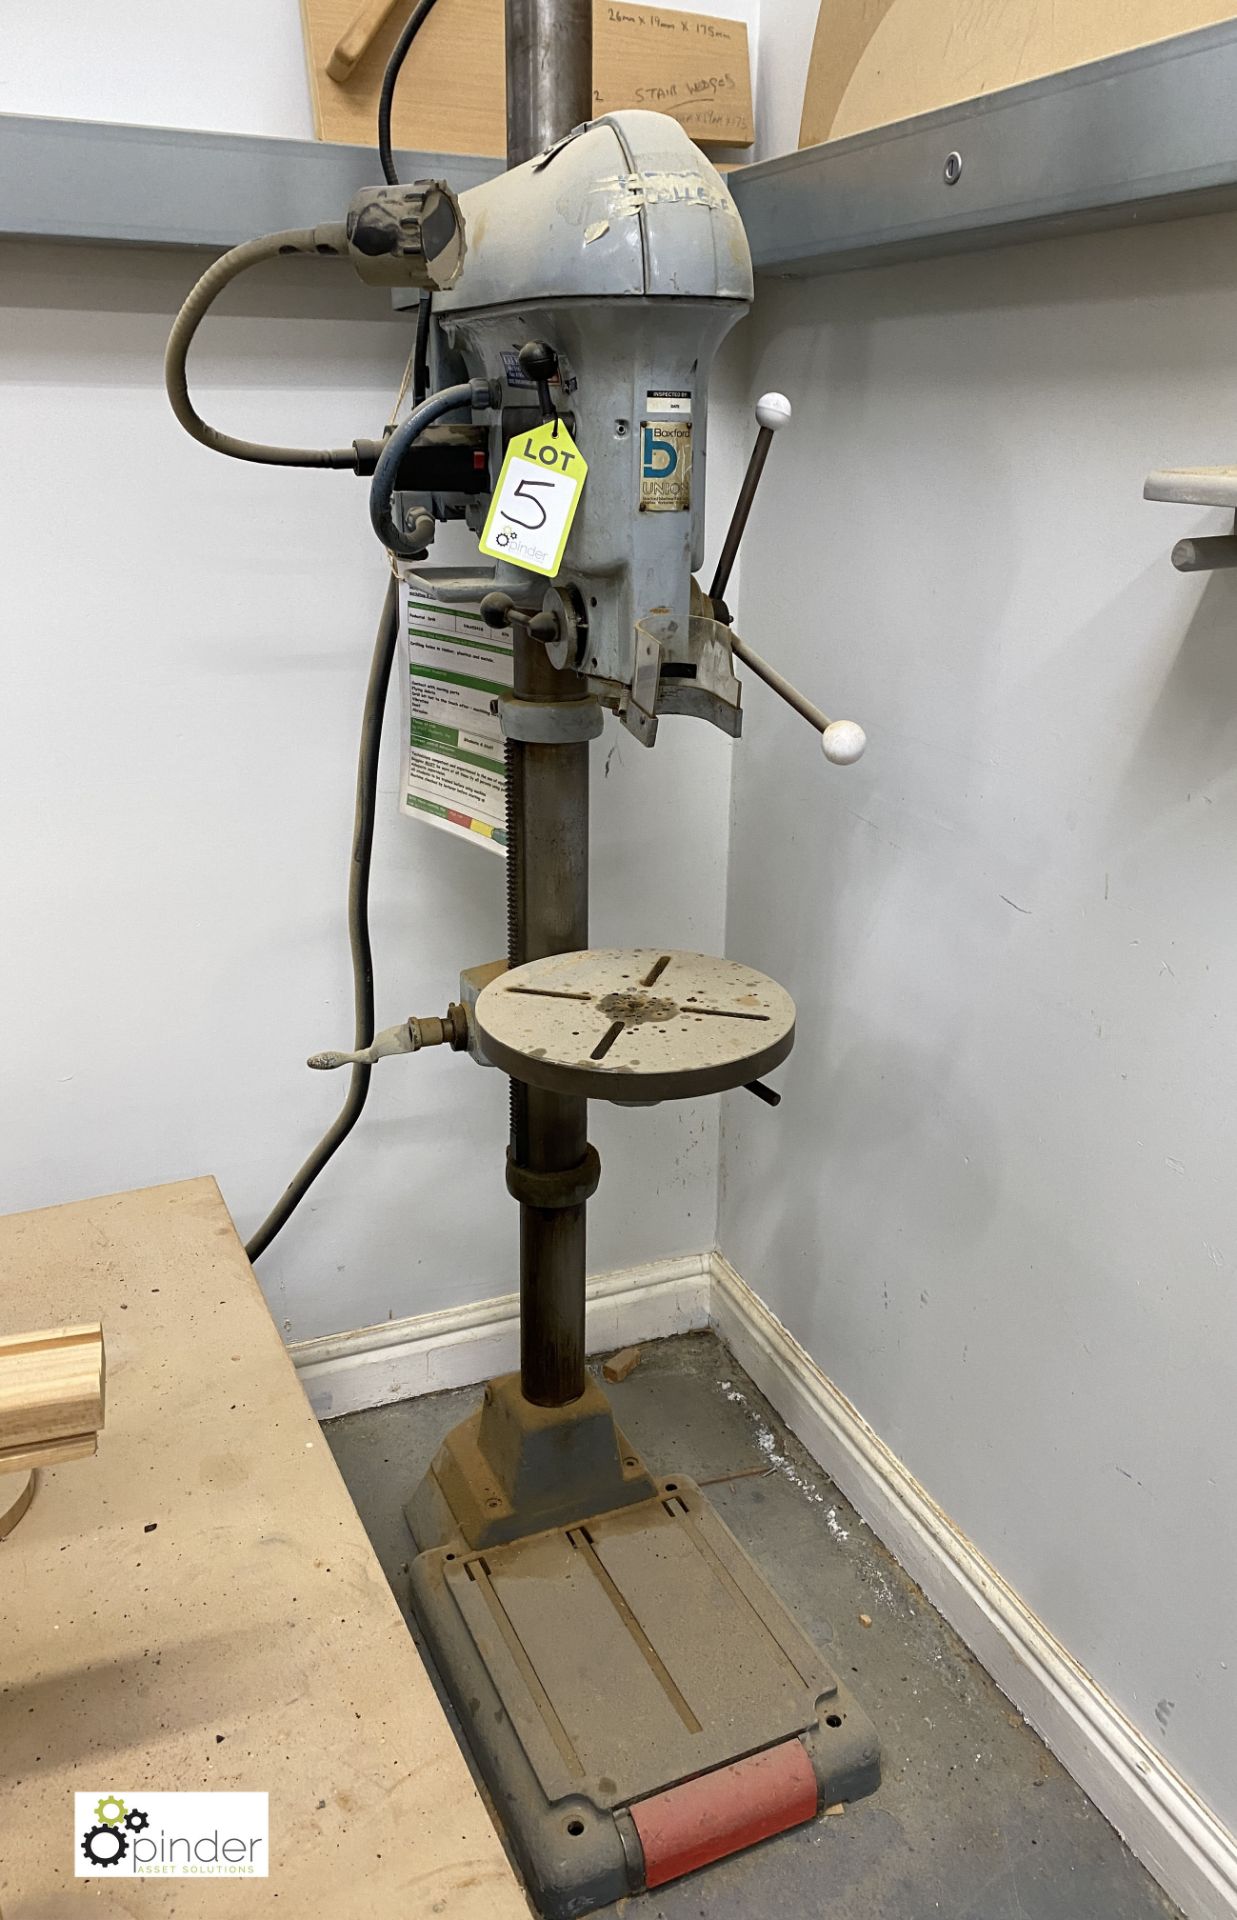 Boxford Union Pillar Drill, 415volts, with rise and table (location: Level 1, Joinery Workrooms)